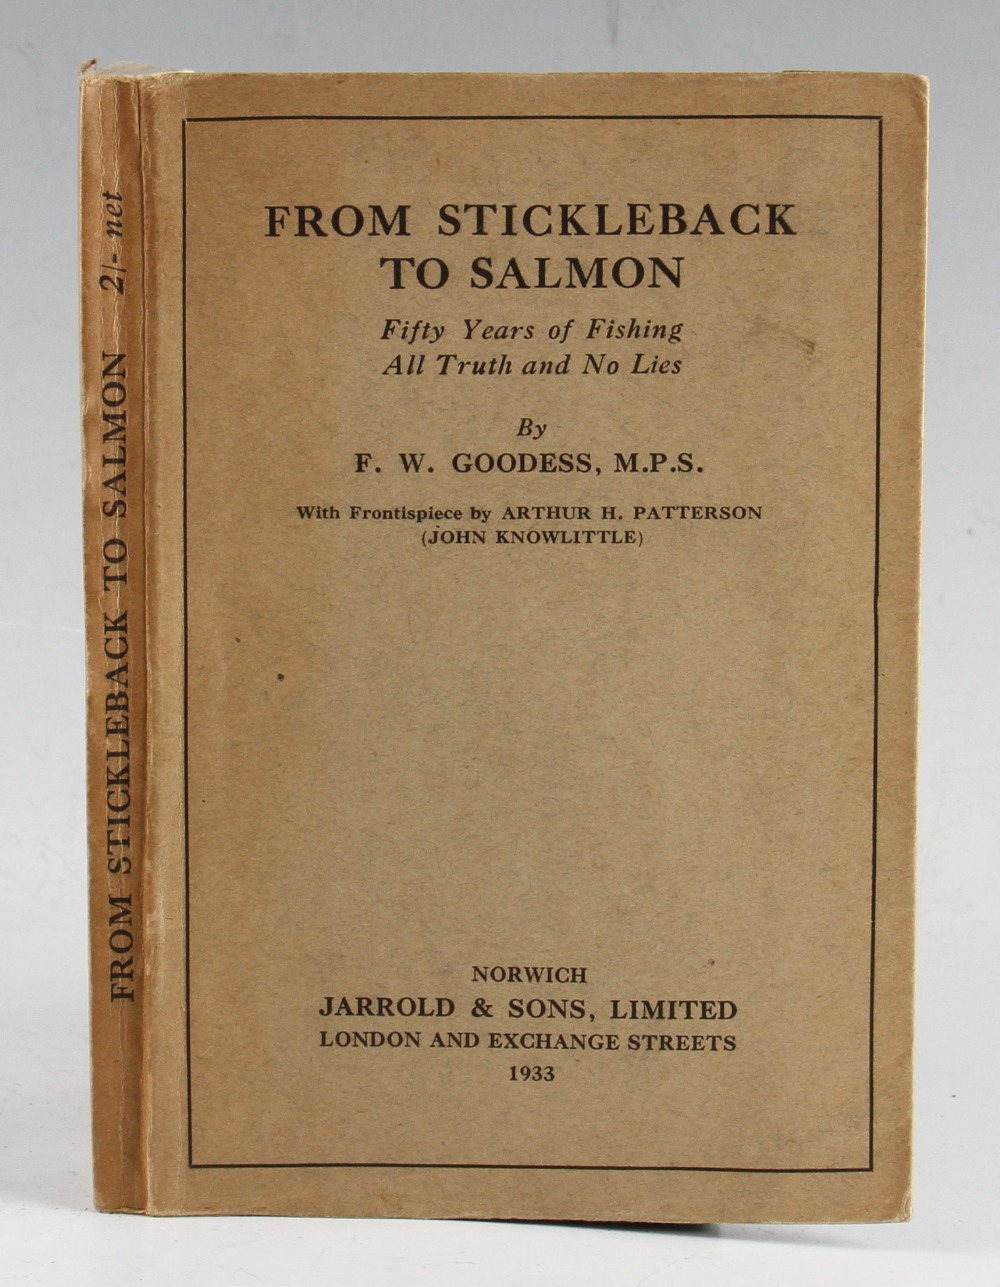 Goodess, F.W. - "From Stickleback To Salmon" Fifty Years of Fishing All Truth and No Lies, Norwich